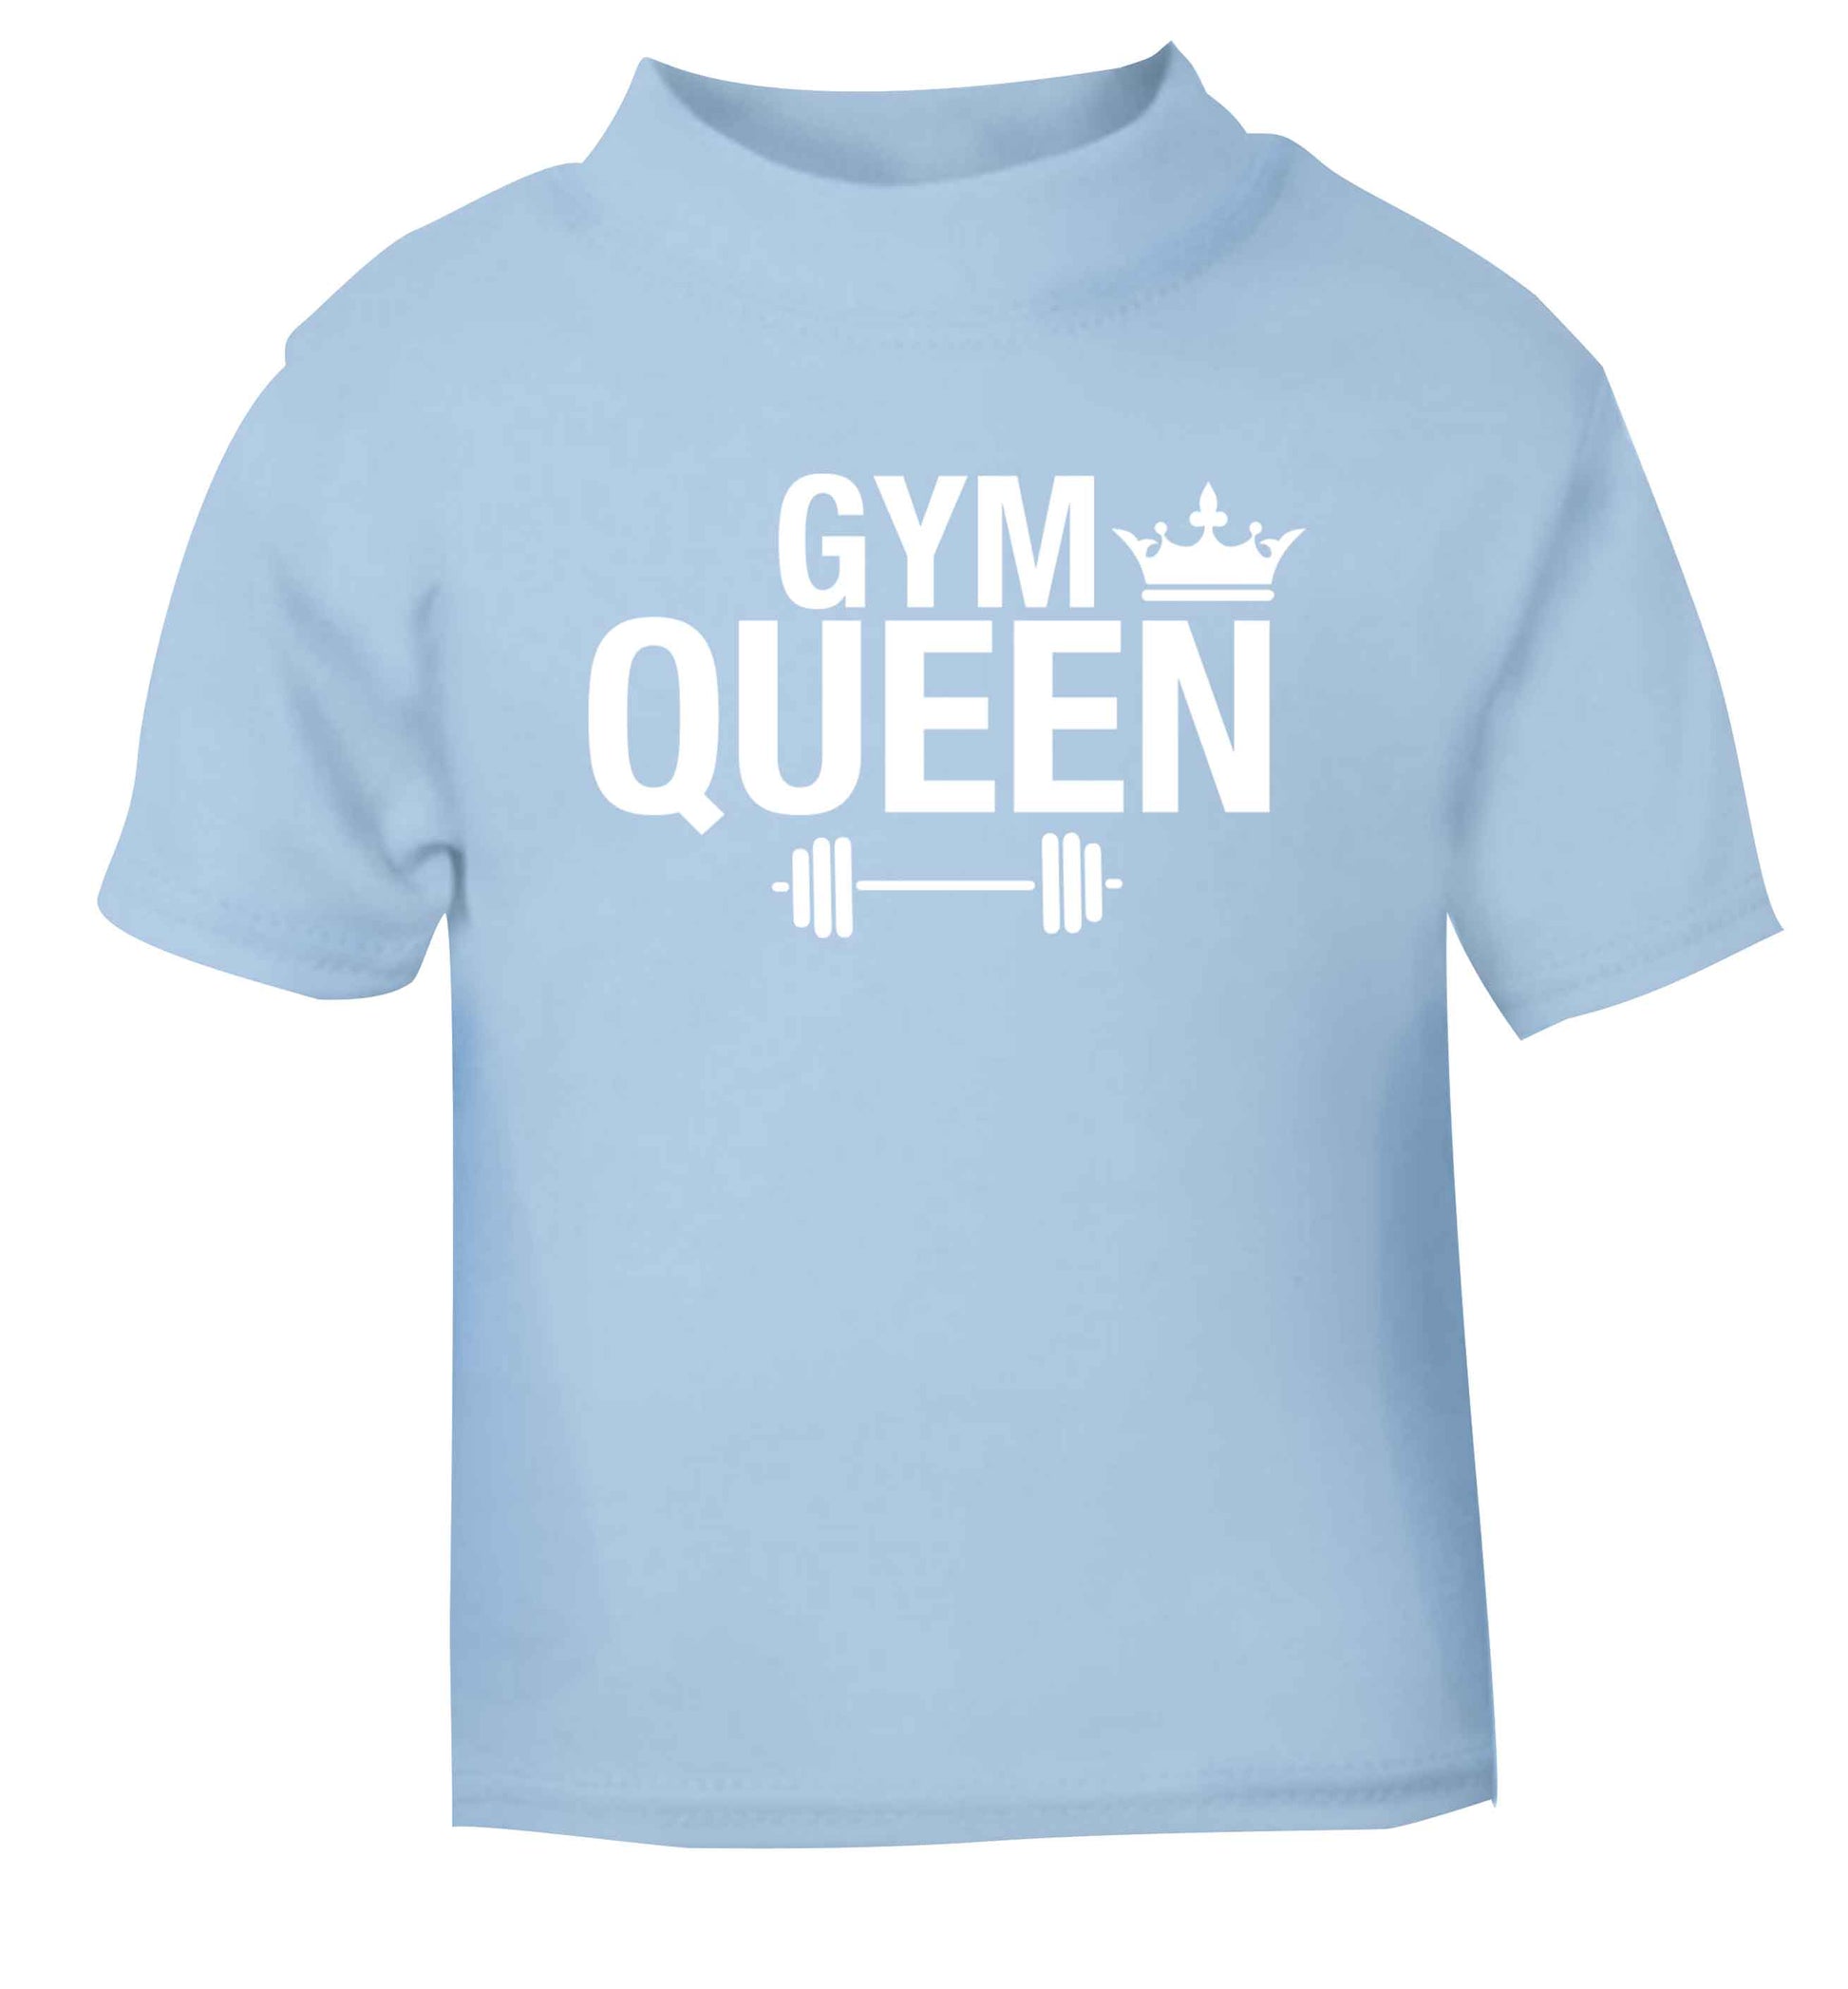 Gym queen light blue Baby Toddler Tshirt 2 Years